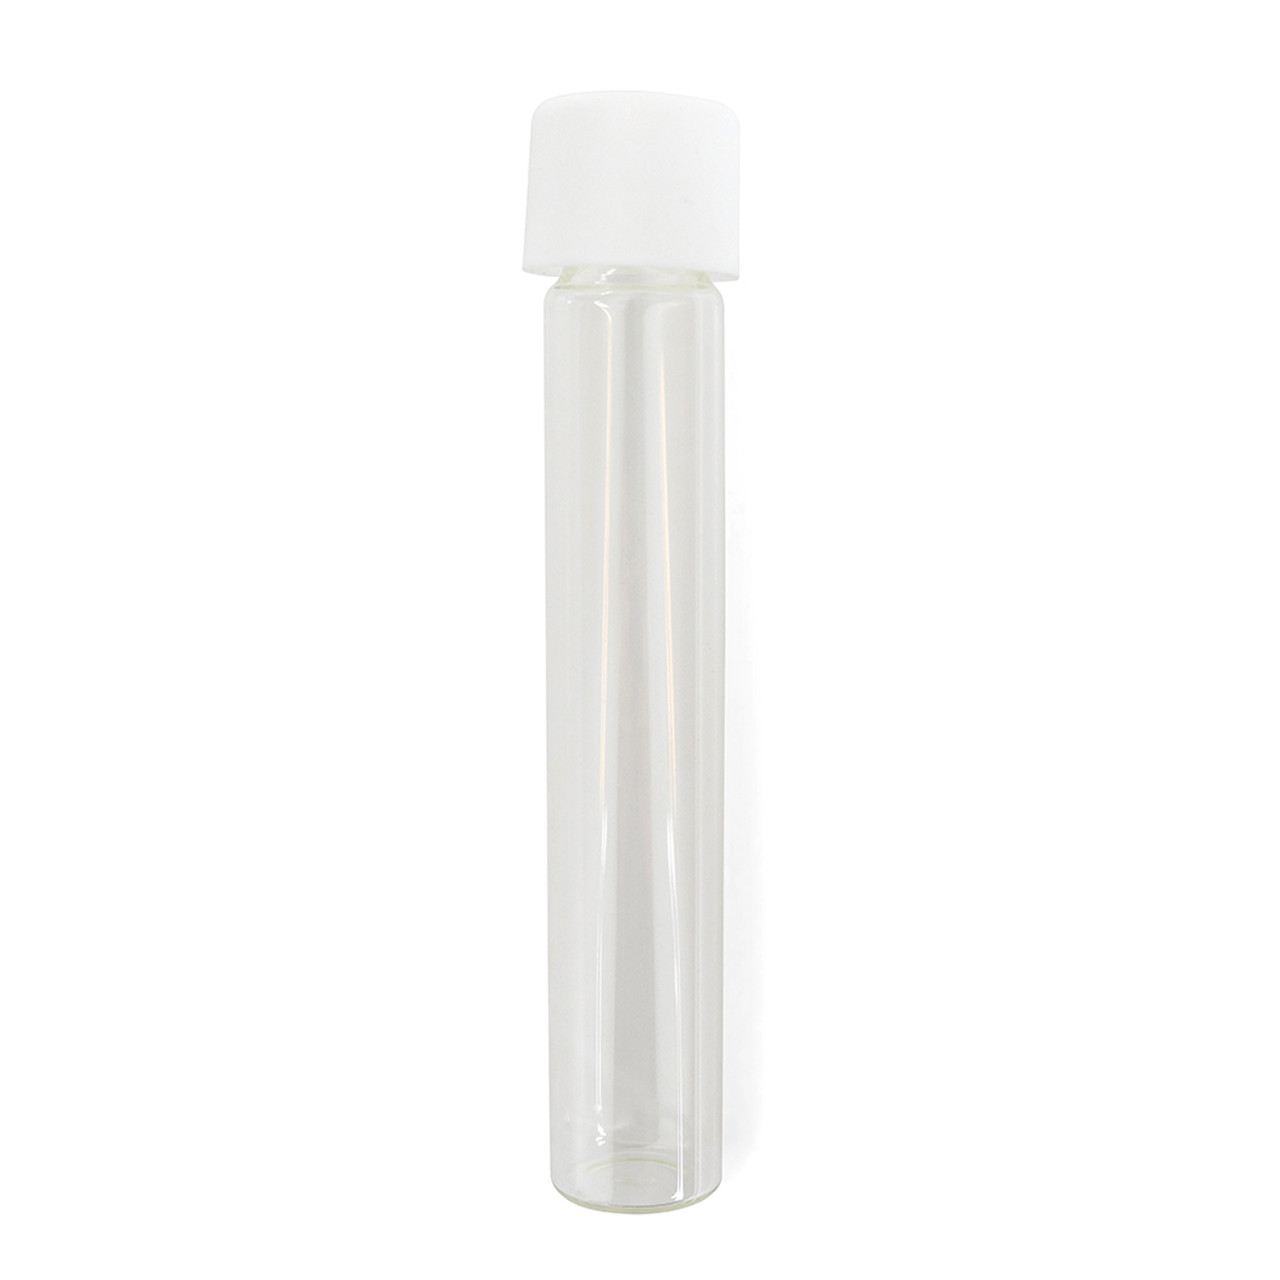 Glass Pre-Roll Tubes: 18mm, 115mm, 400 Count